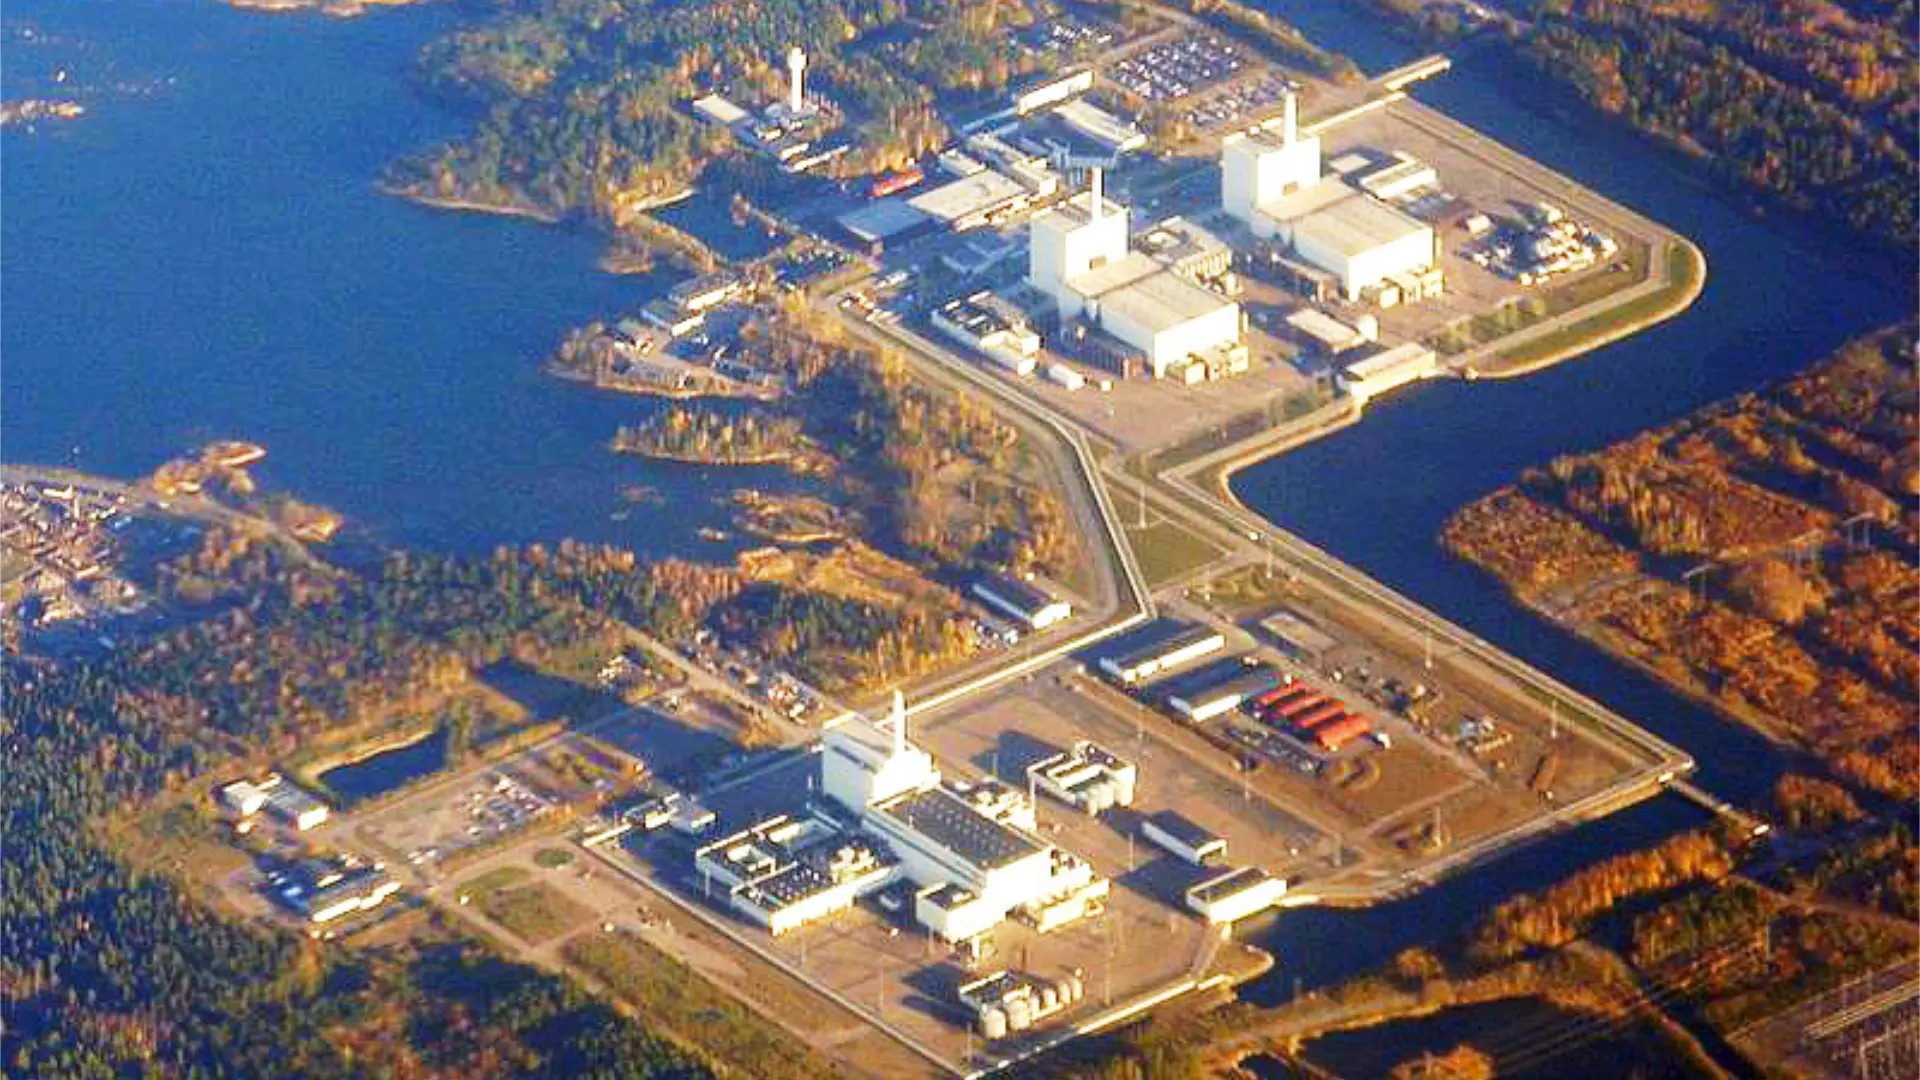 The Forsmark nuclear power plant in Sweden.